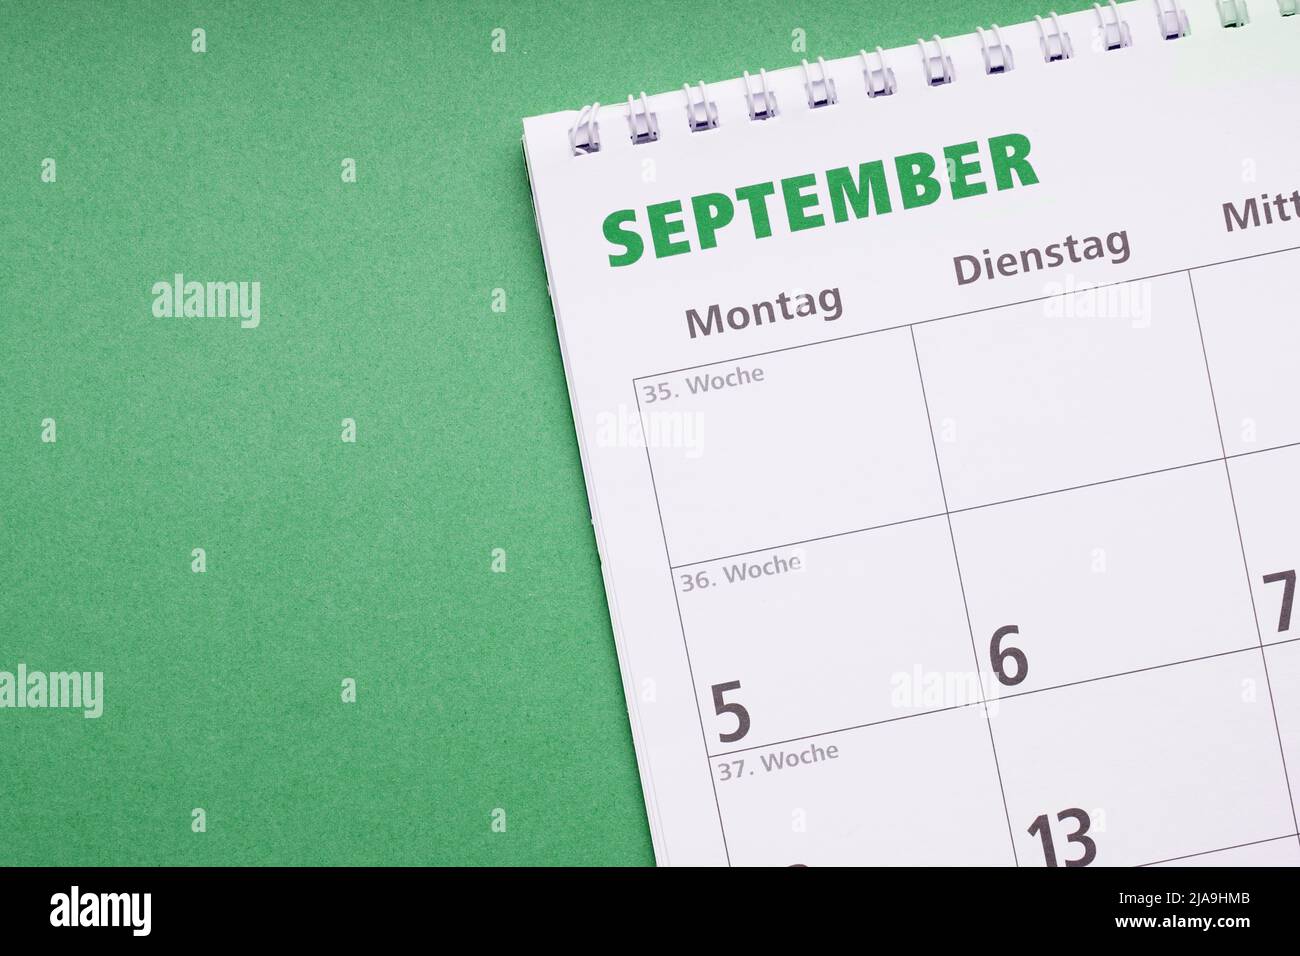 german calendar or planner for the month of september Stock Photo